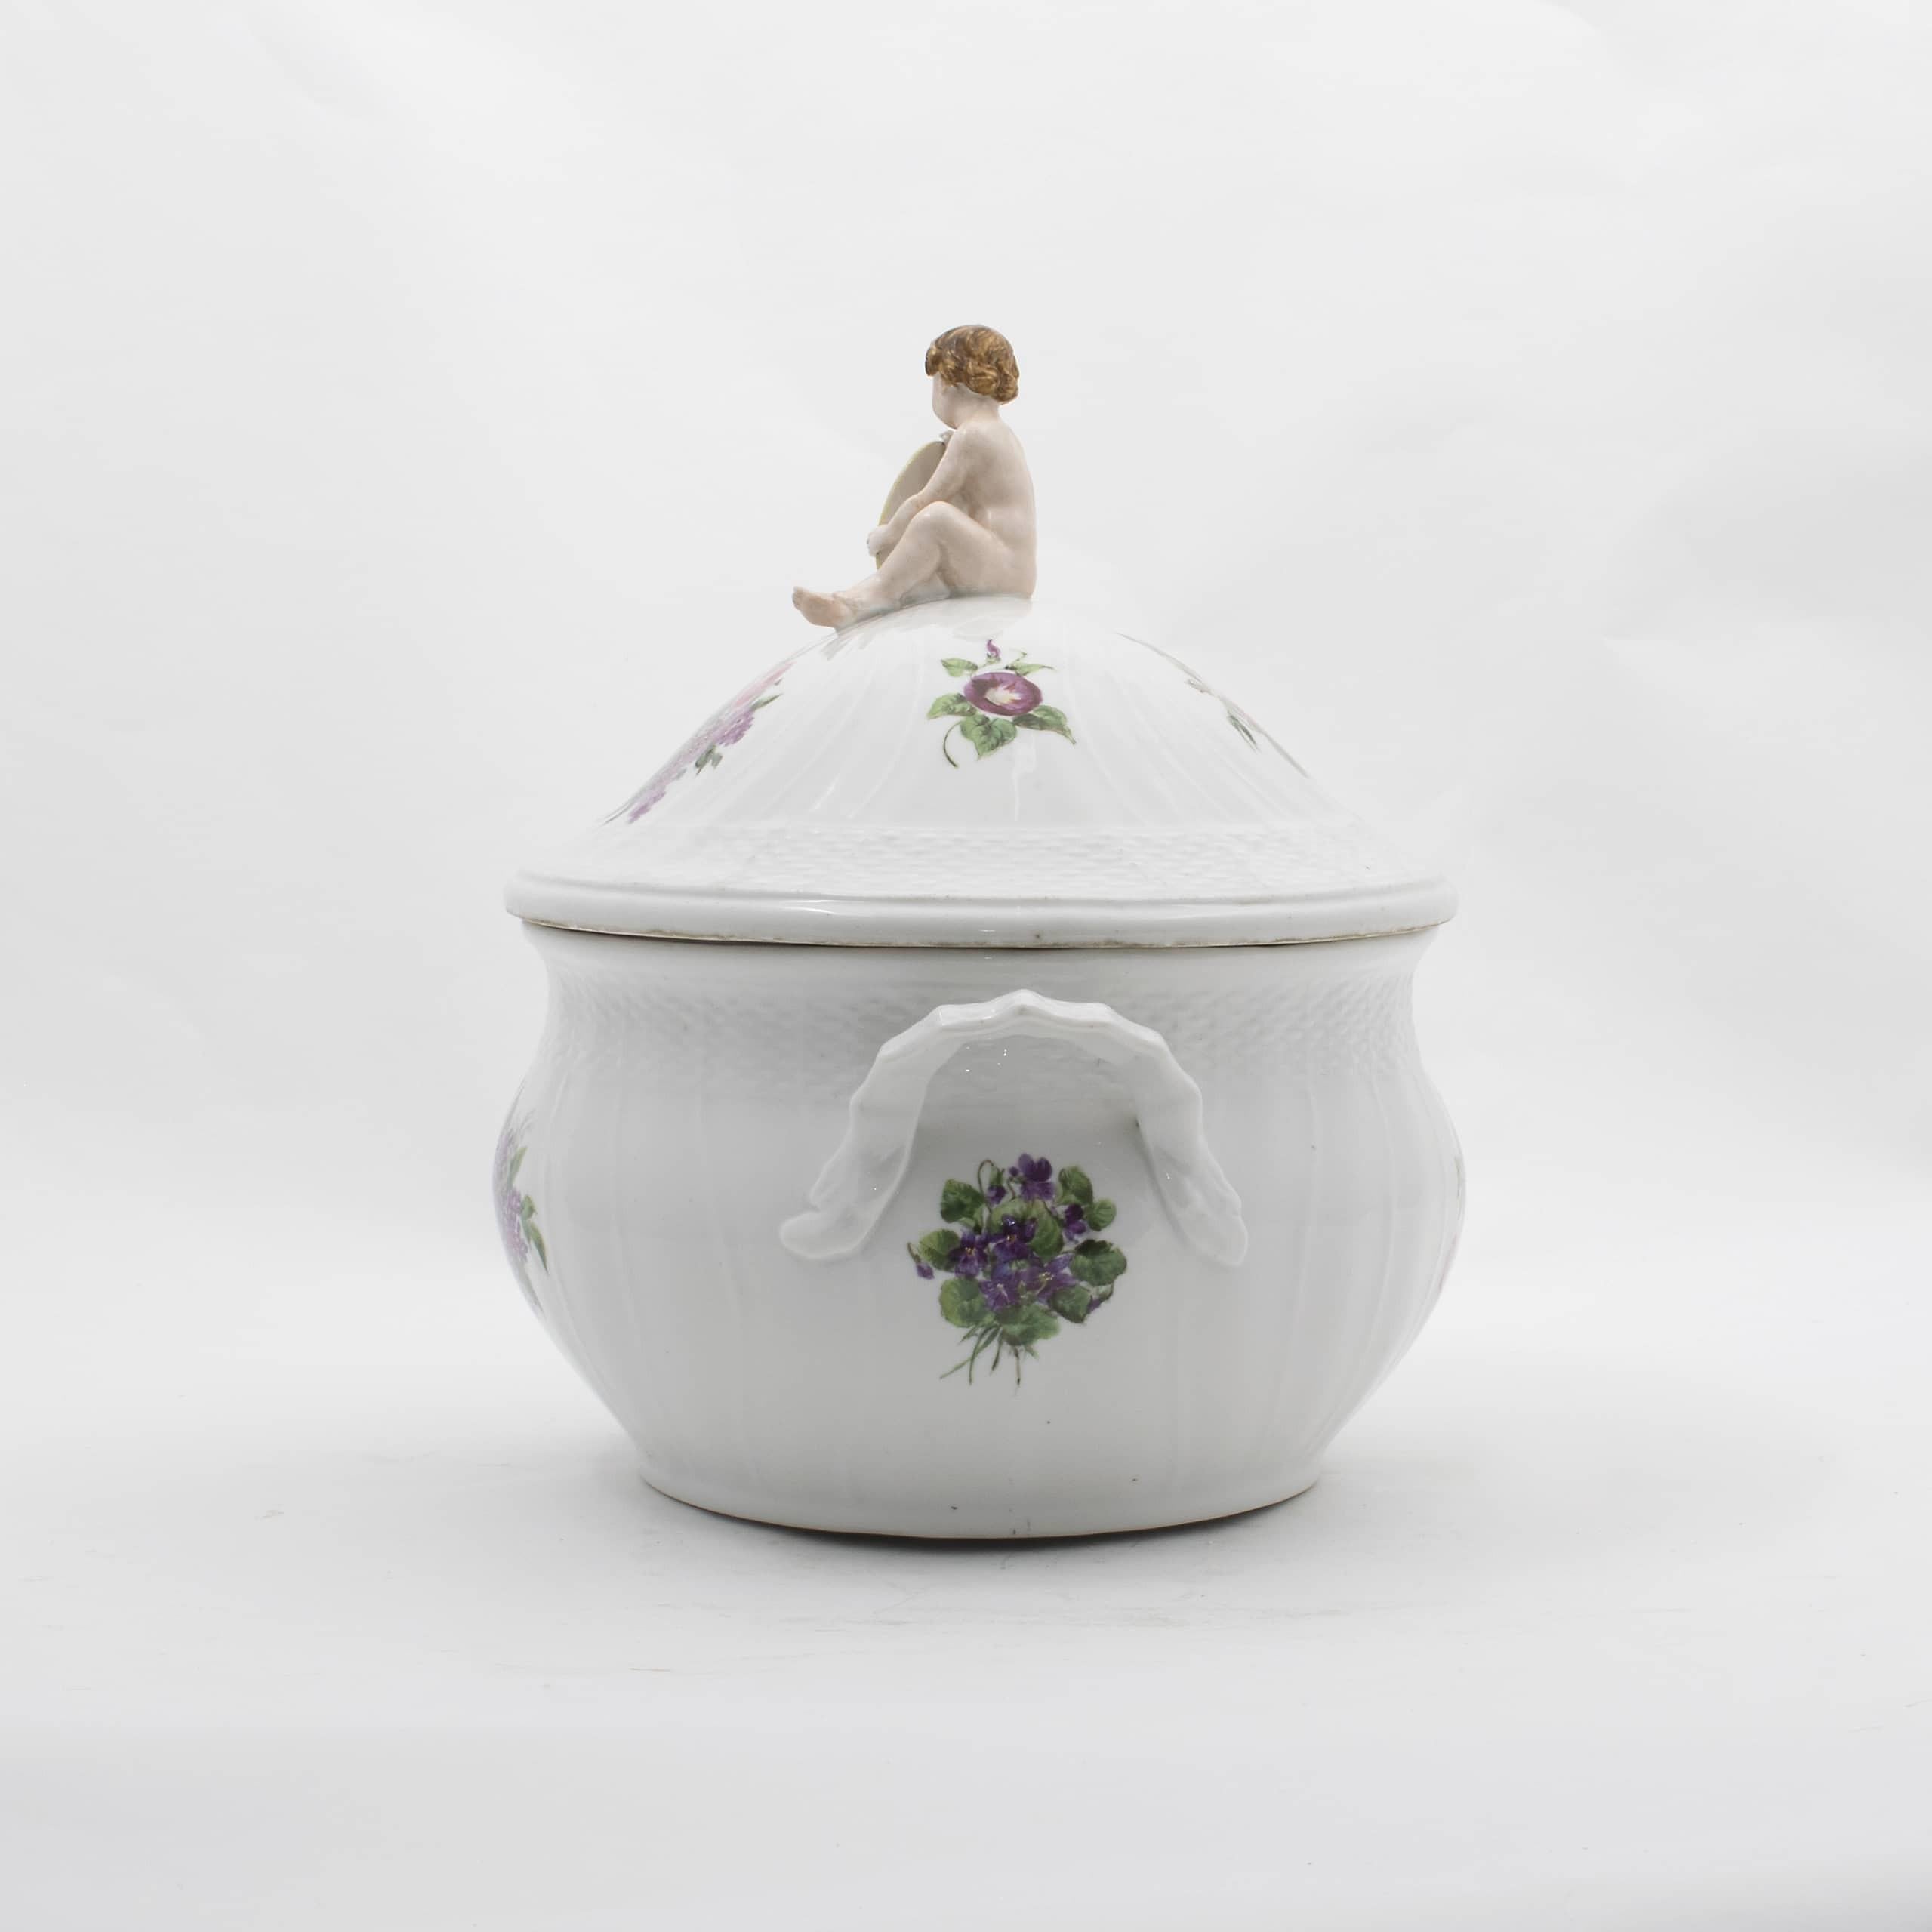 Royal Copenhagen Saxon flower.
Large lidded tureen in hand-painted porcelain with different flowers. Modelled with putto on top.
Marked on the bottom with 3 waves Royal Copenhagen marking (representing the 3 waterways of Denmark), approx.